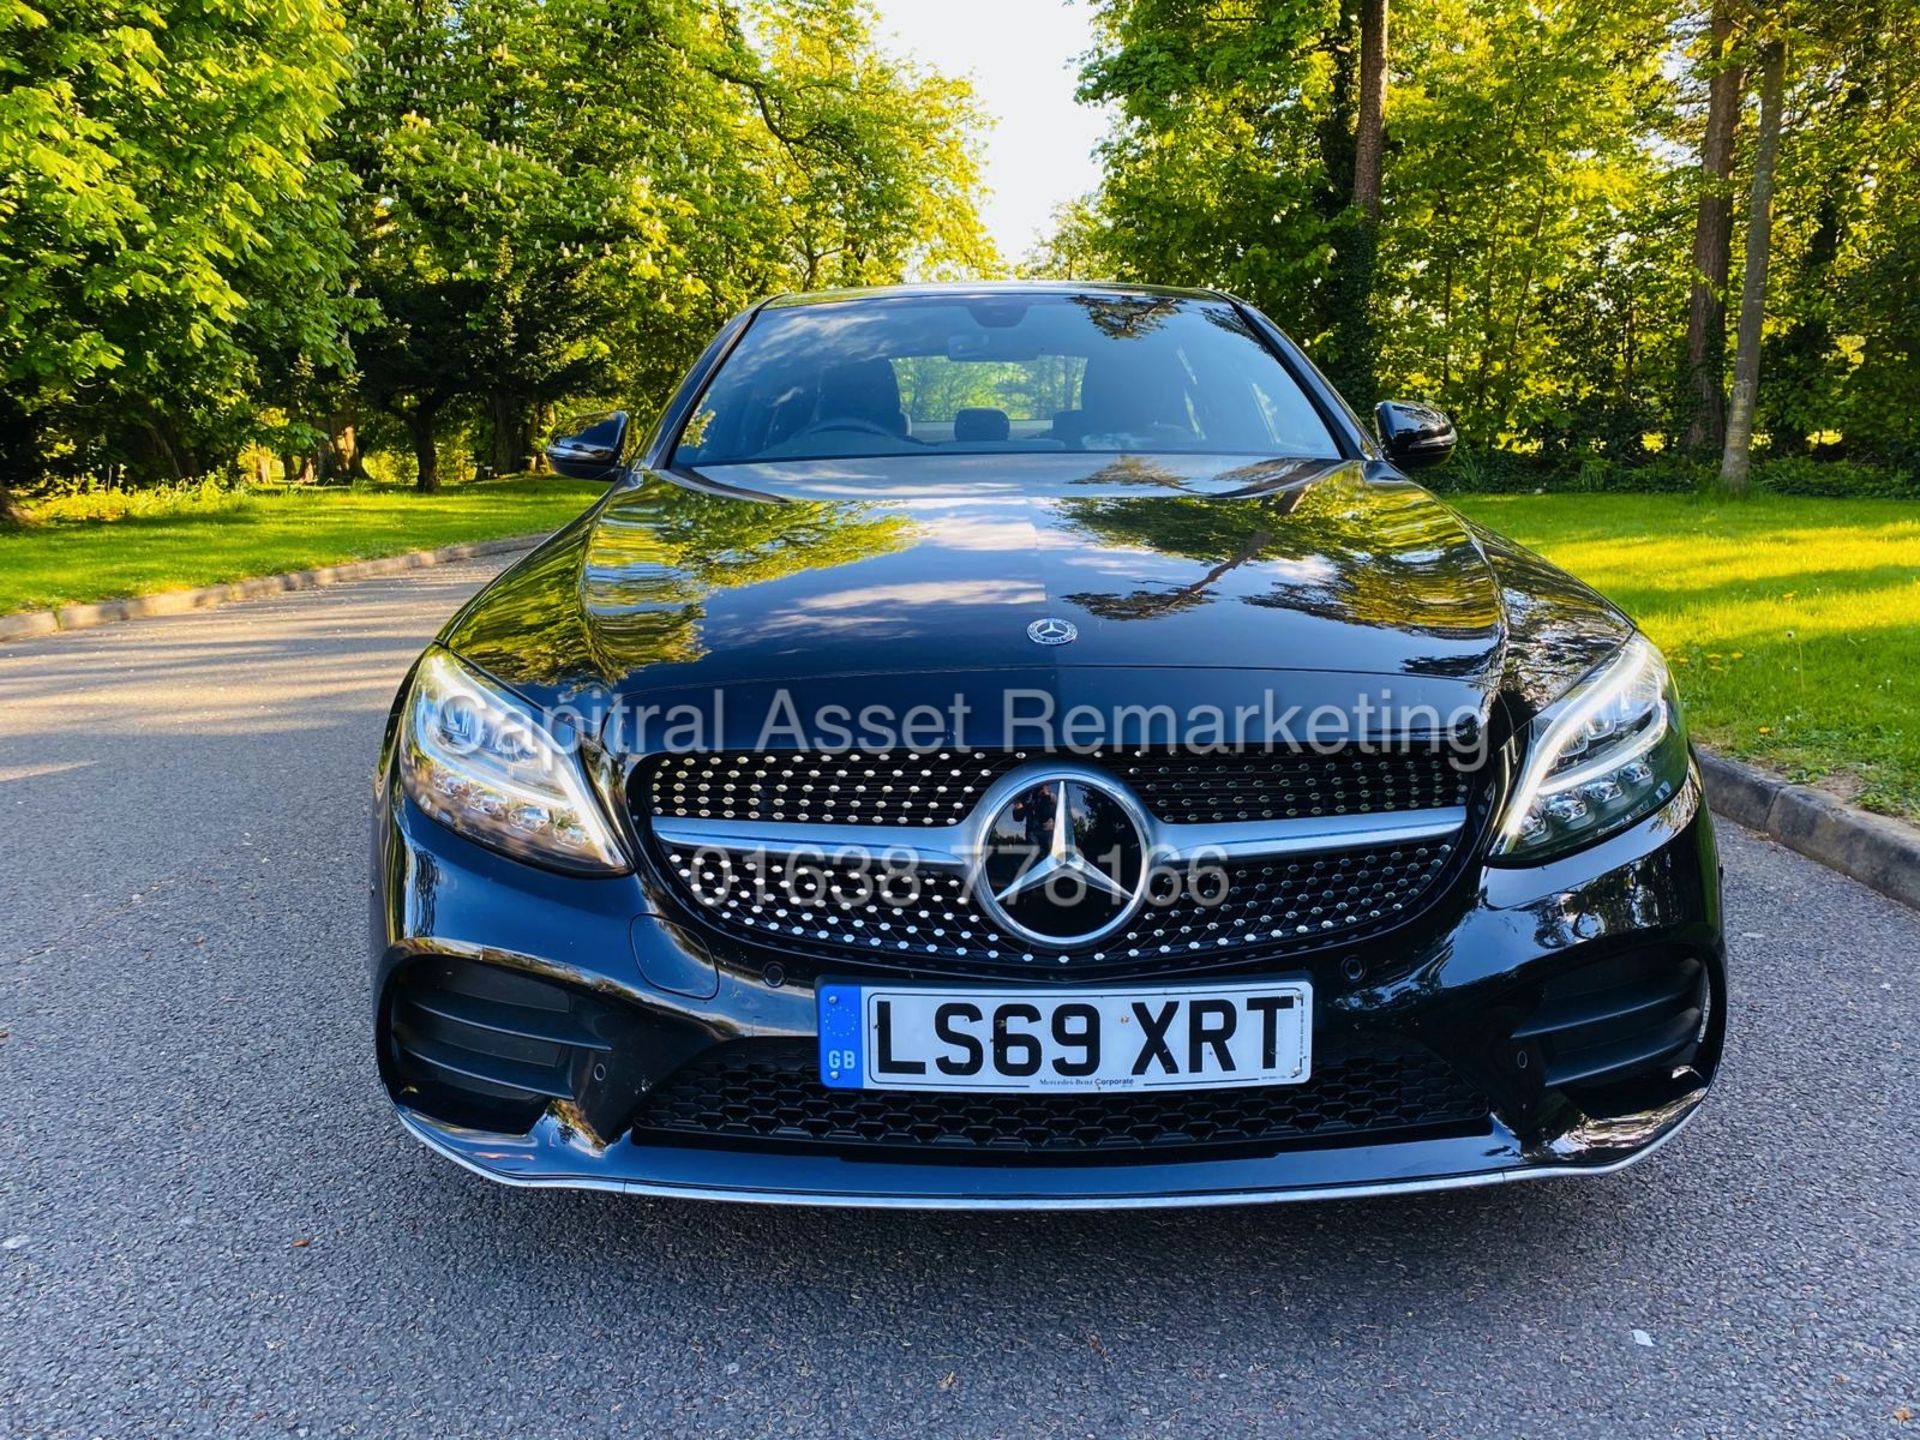 MERCEDES C220d "AMG-LINE" 9G TRONIC (69 REG - FACELIFT MODEL) 1 OWNER *GREAT SPEC* A MUST SEE - Image 2 of 30